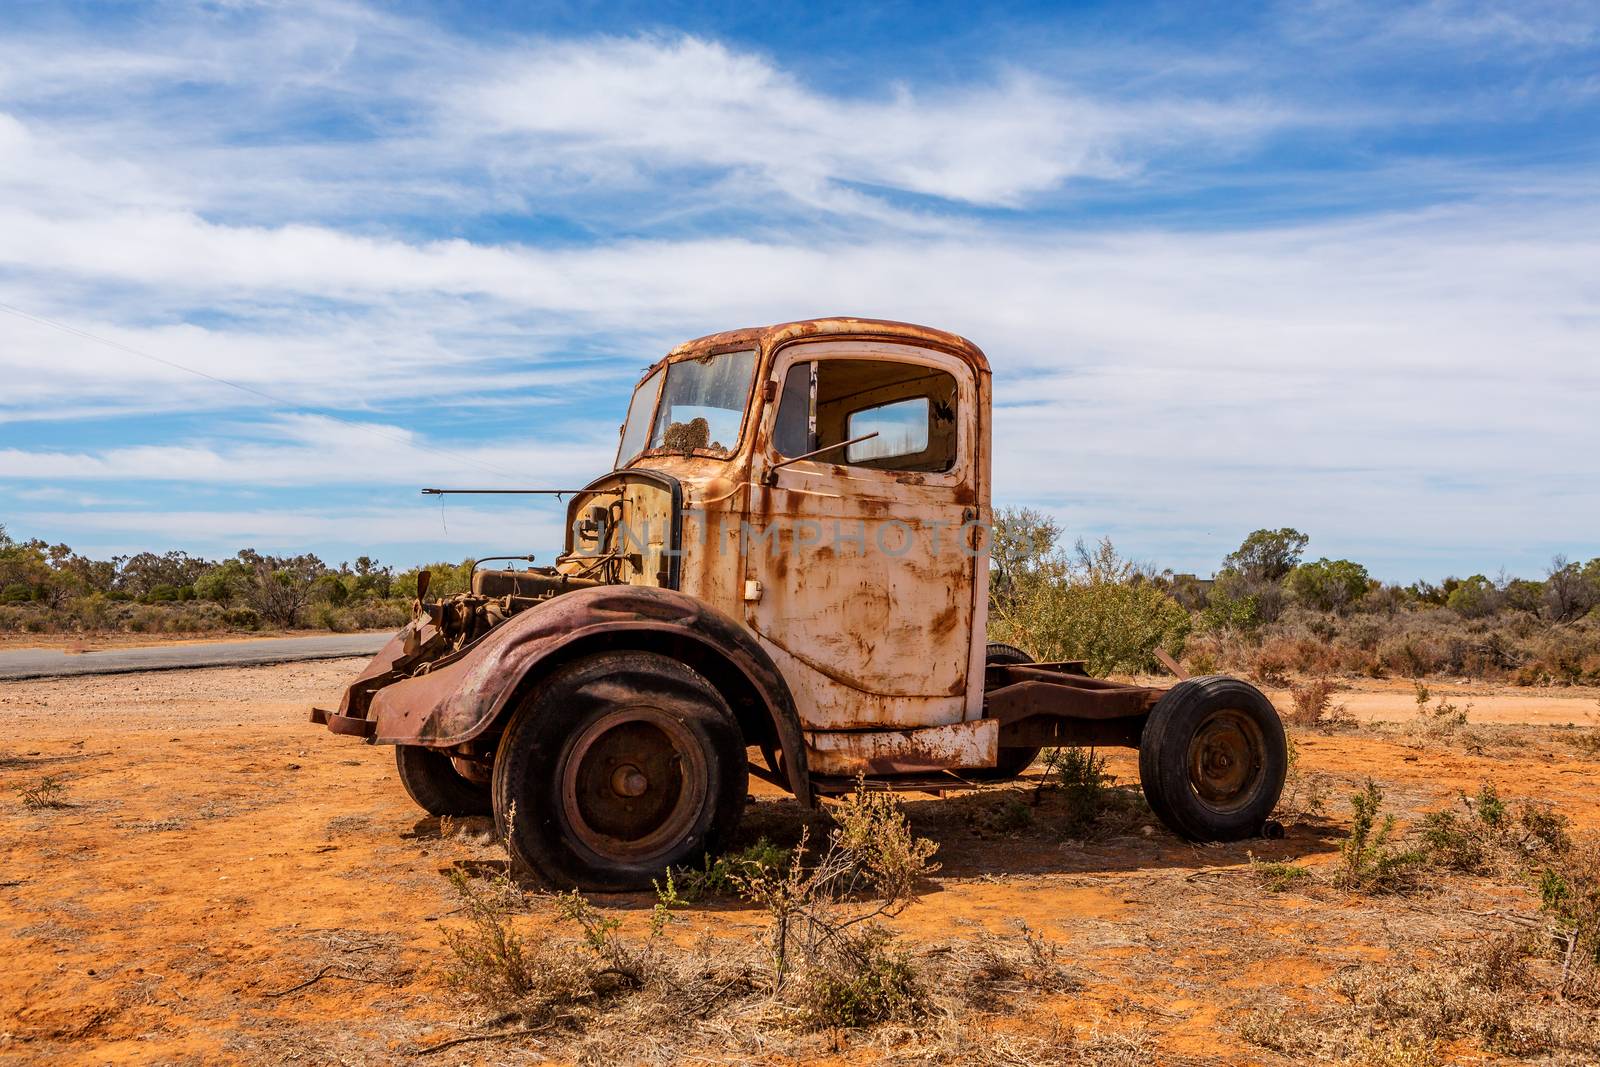 Old relic truck  metal fan sticking out from its bonnet, rusting metal panels, sits at the side of the road on red desert soils under blue skies